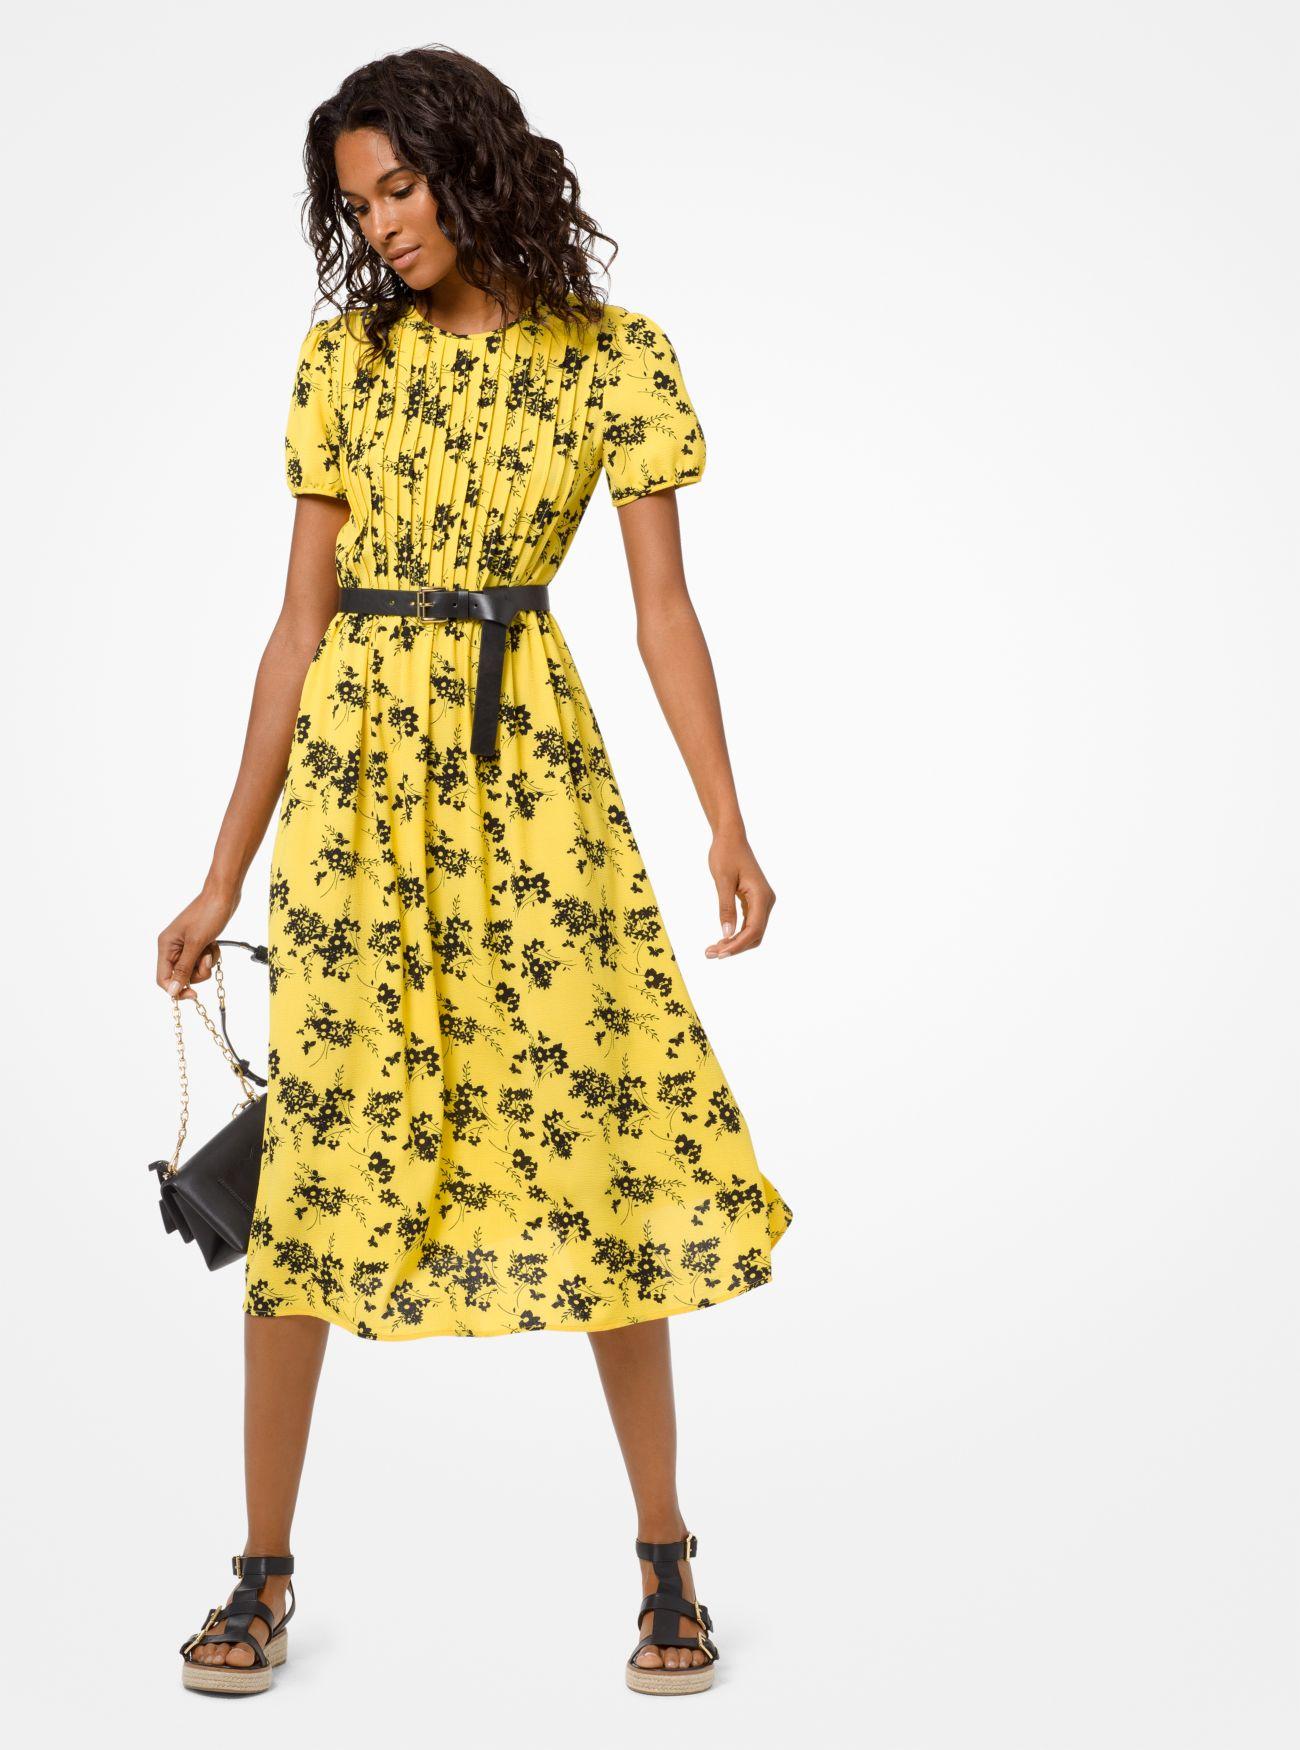 udrydde for mig Postkort Michael Kors Synthetic Botanical Pintucked Dress in Golden Yellow/Black  (Yellow) - Lyst